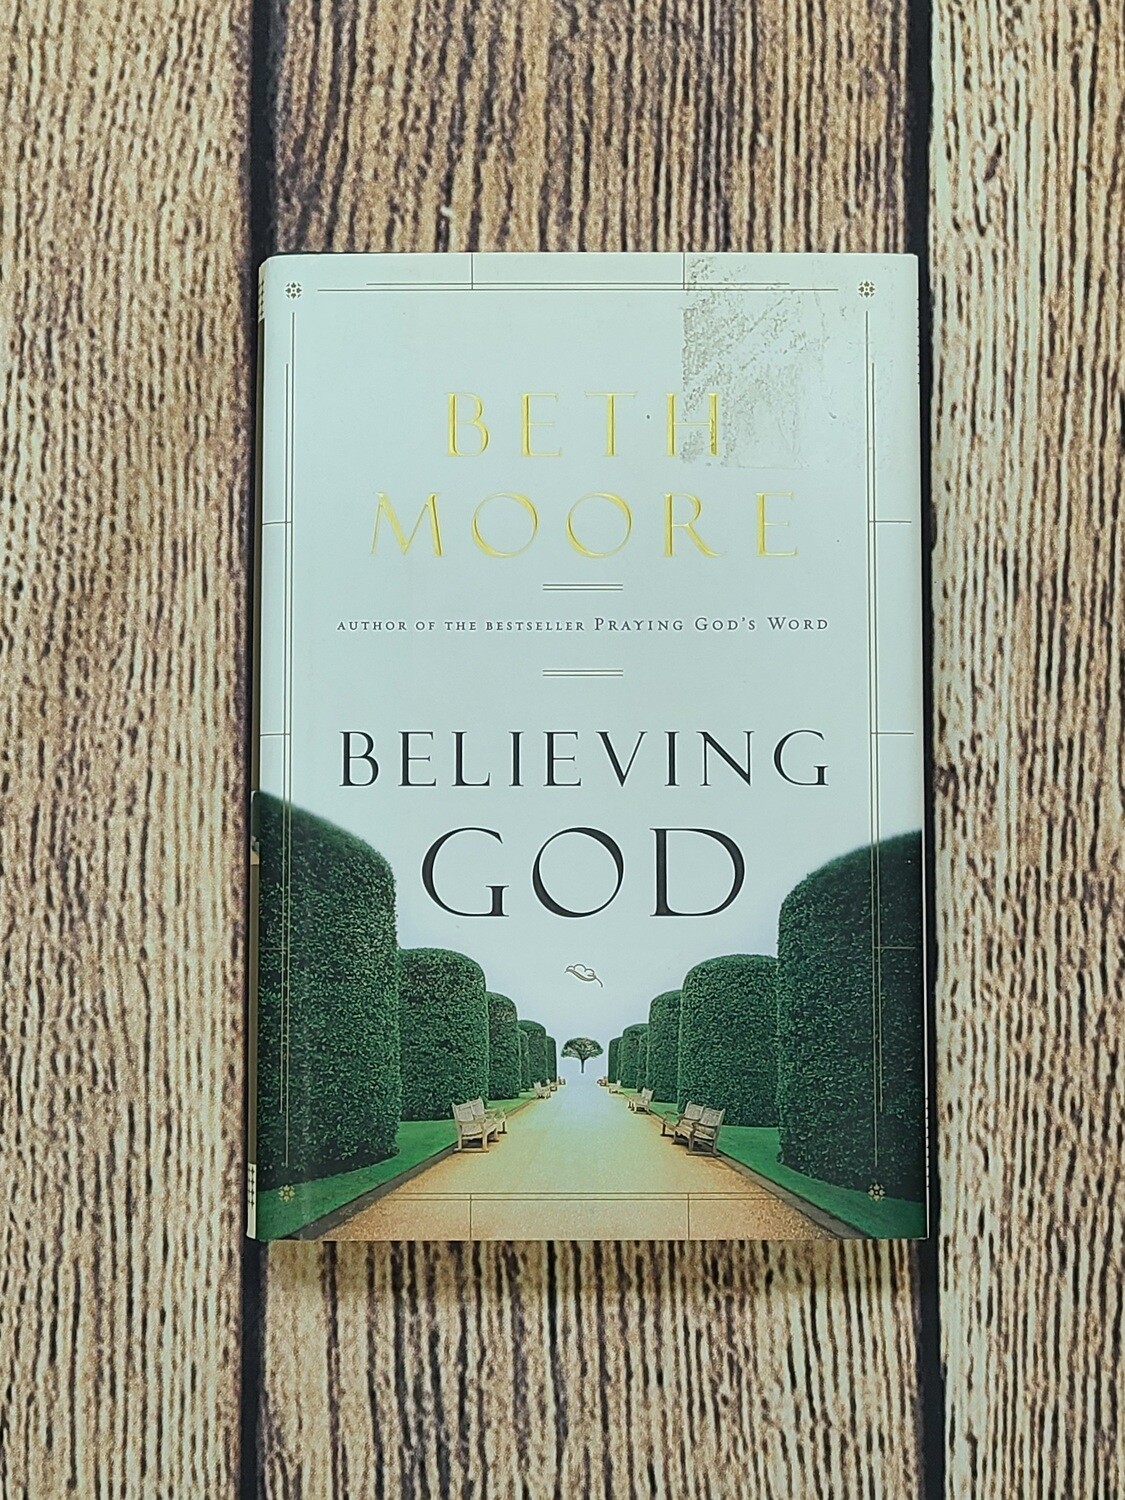 Believing God by Beth Moore